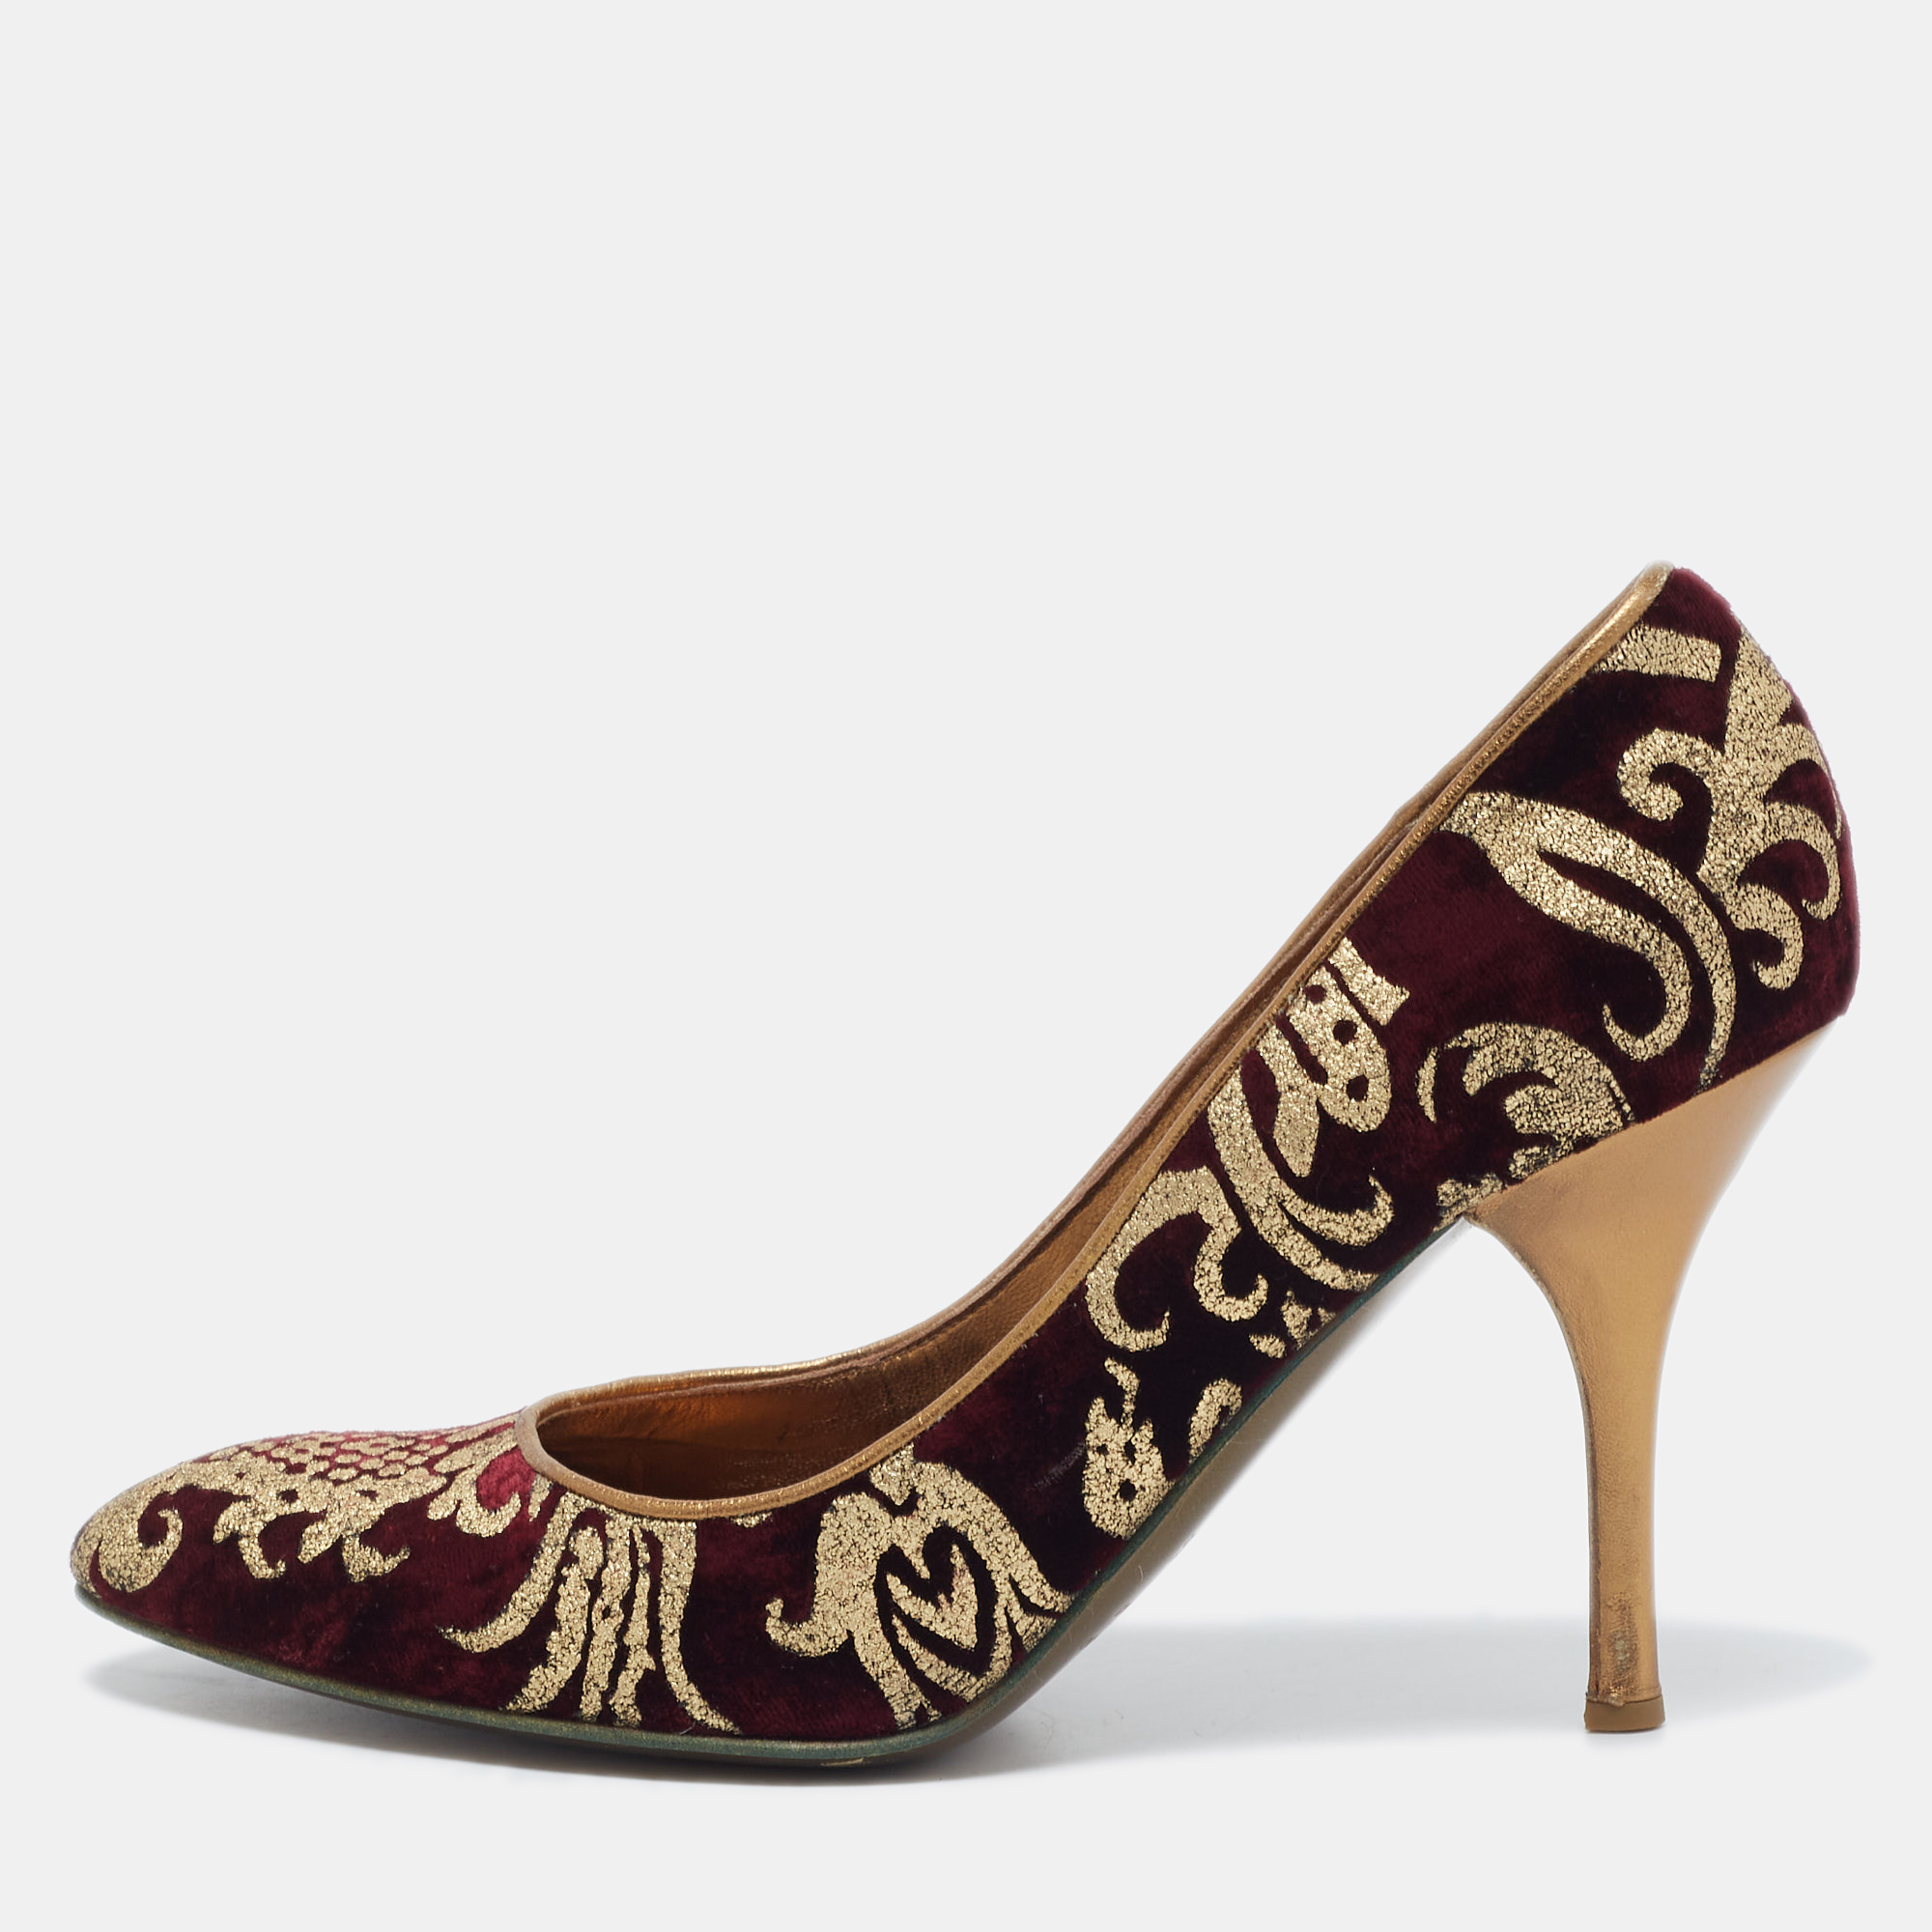 Pre-owned Roberto Cavalli Burgundy Velvet Embroidered Pumps Size 38.5